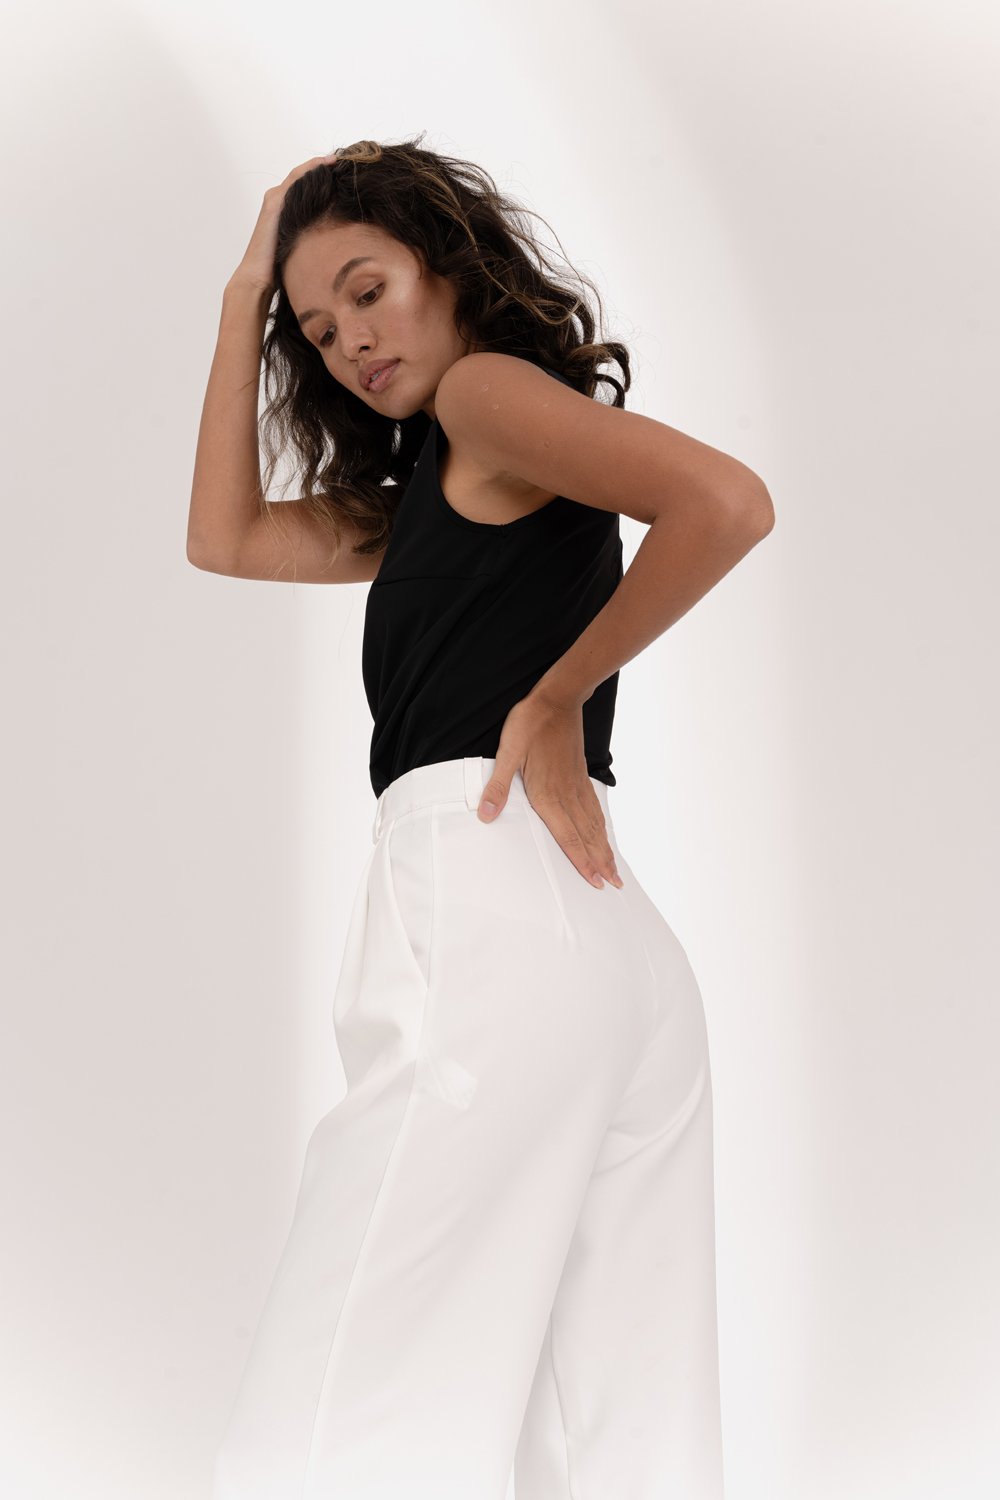 Milky wide leg trousers with a waistband and side pockets